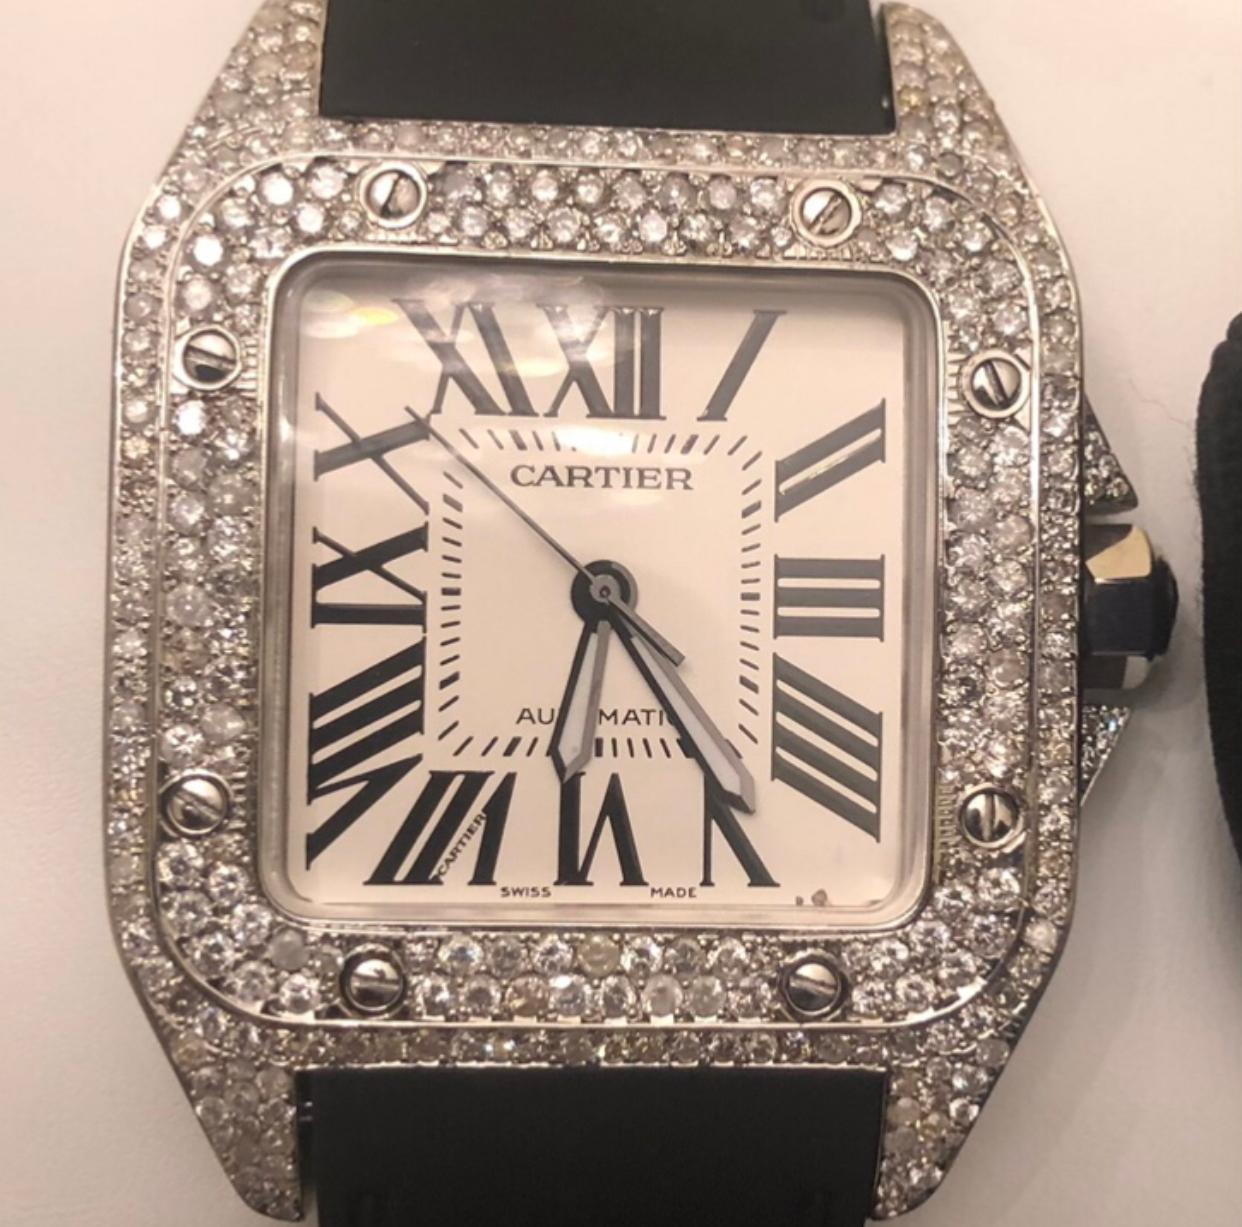 Custom Cartier Santos 100XL complete with box and booklet papers.

Cartier Santos 100XL is customized hand set with approx. 8 carats of natural earth mined diamonds in the bezel, case lugs, and clasp. The diamonds shine beautifully in the